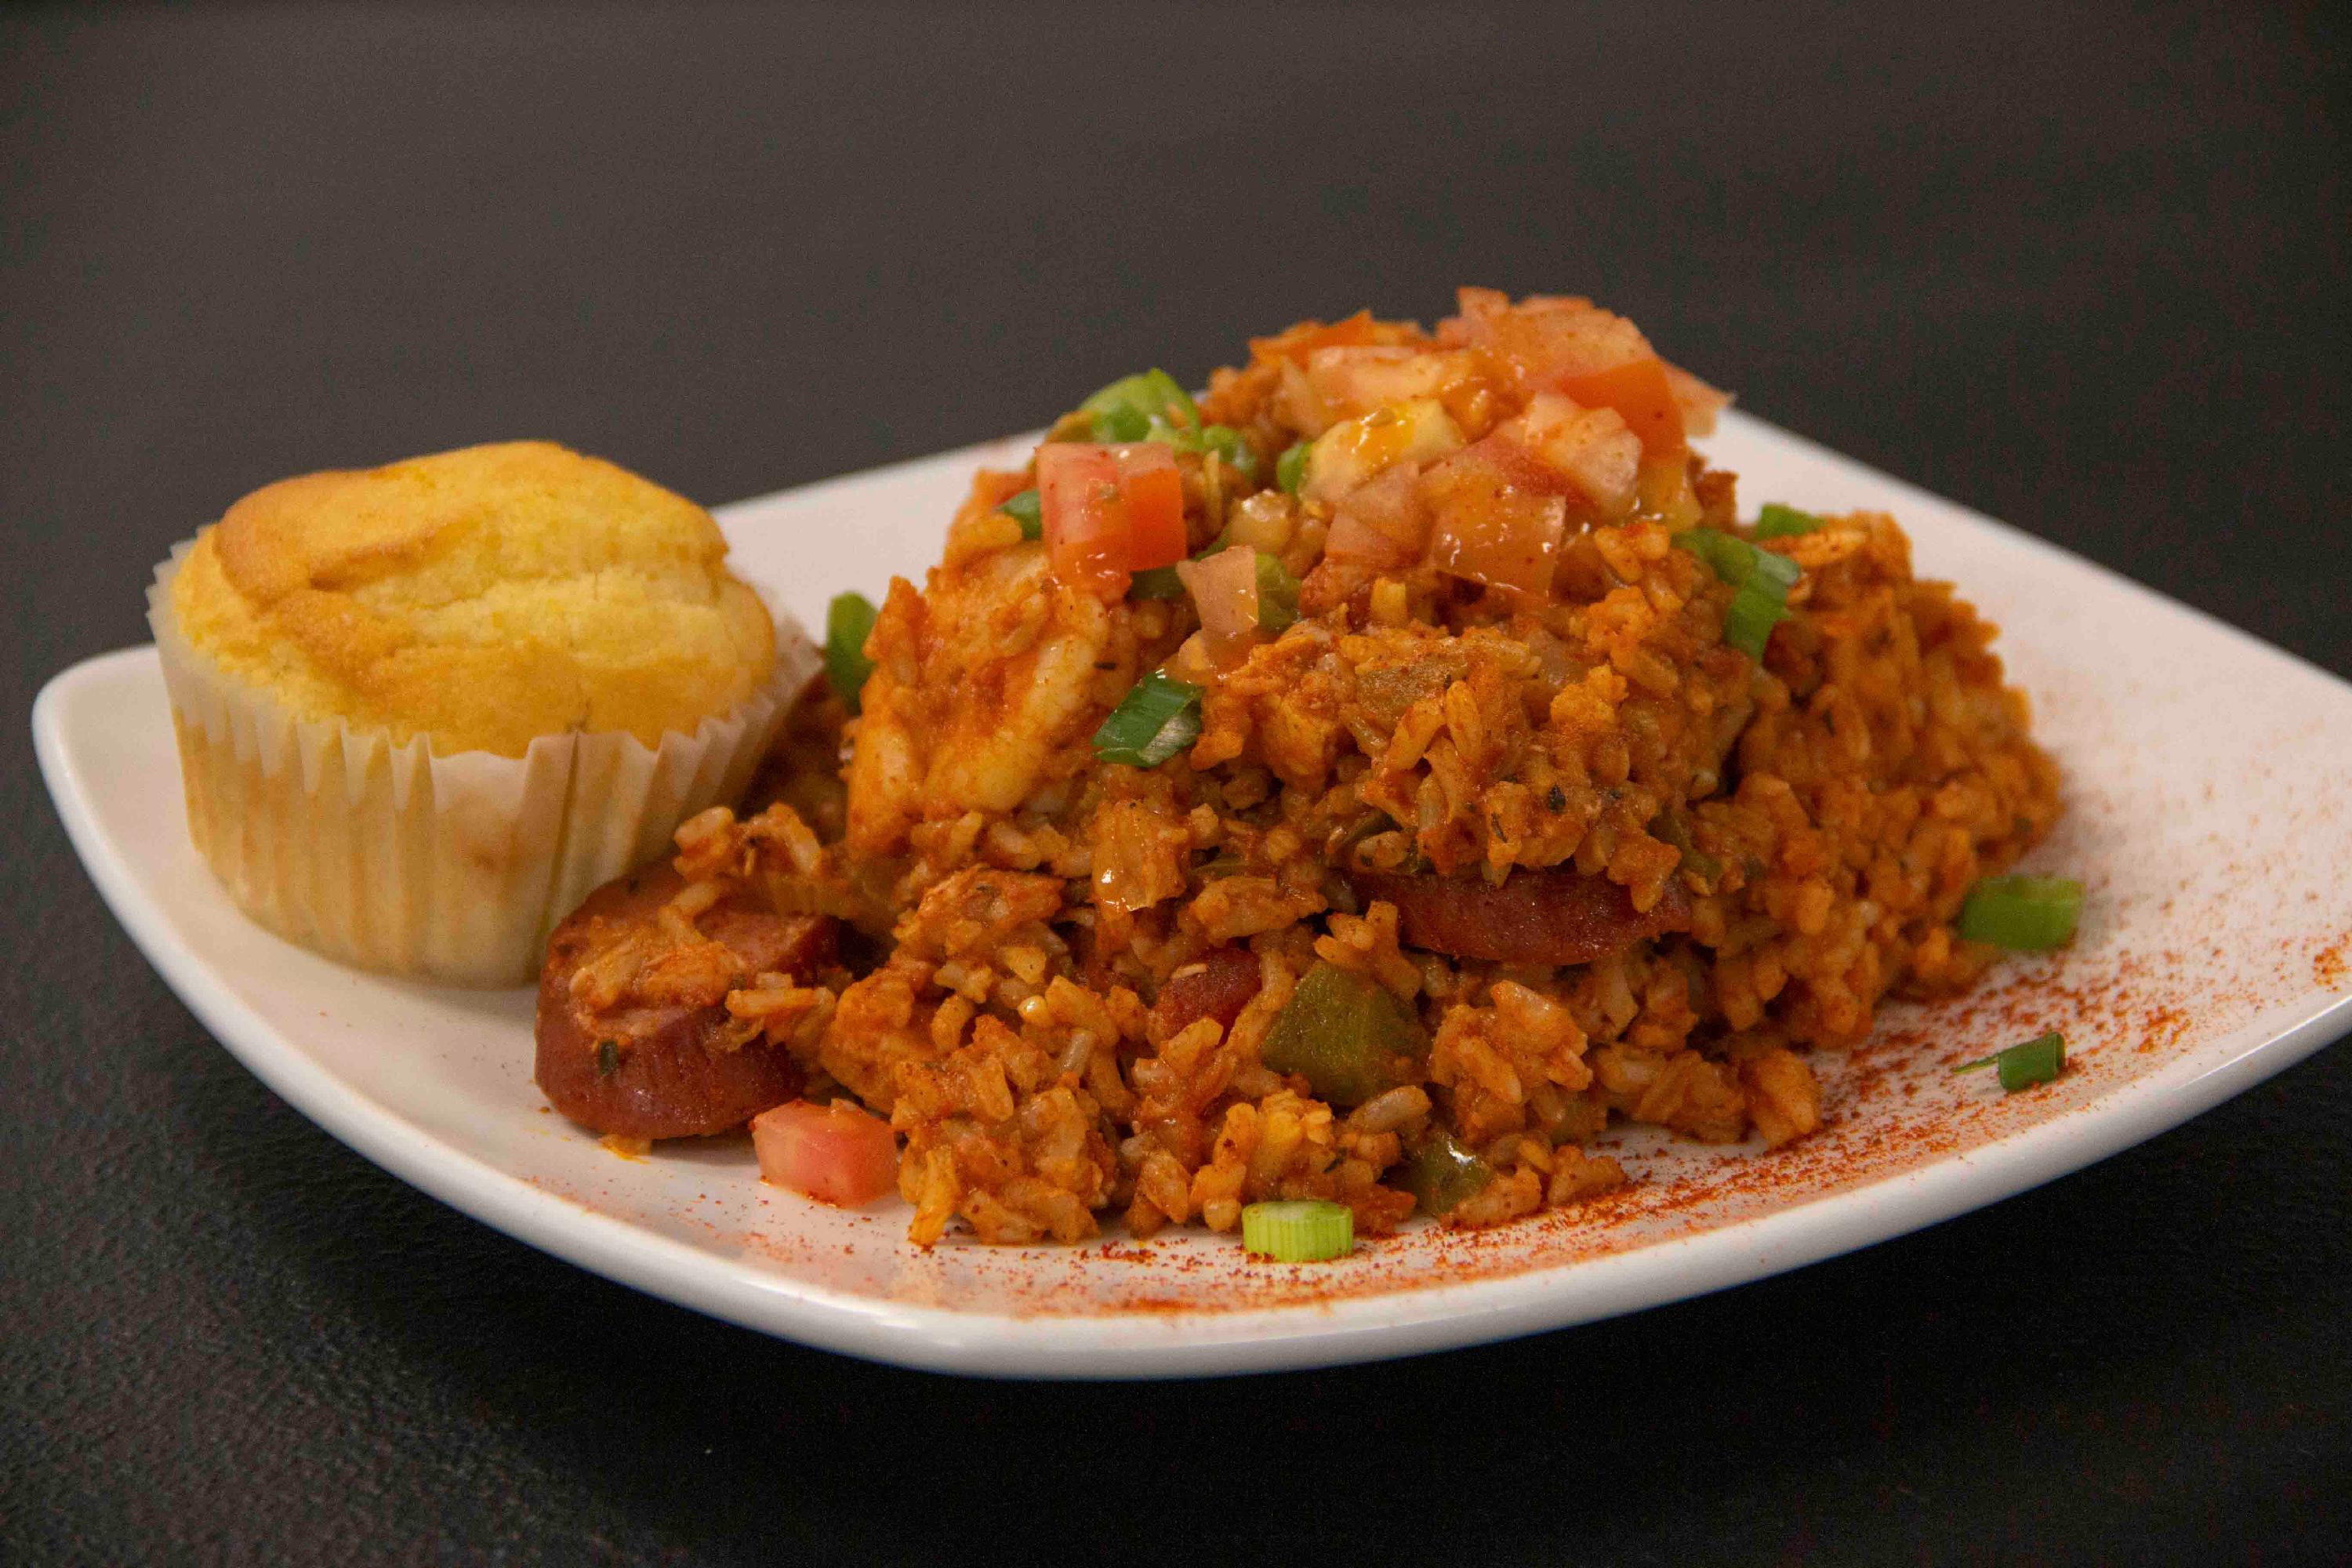 A plate of jambalaya with a small cornbread muffin rests on a dark table